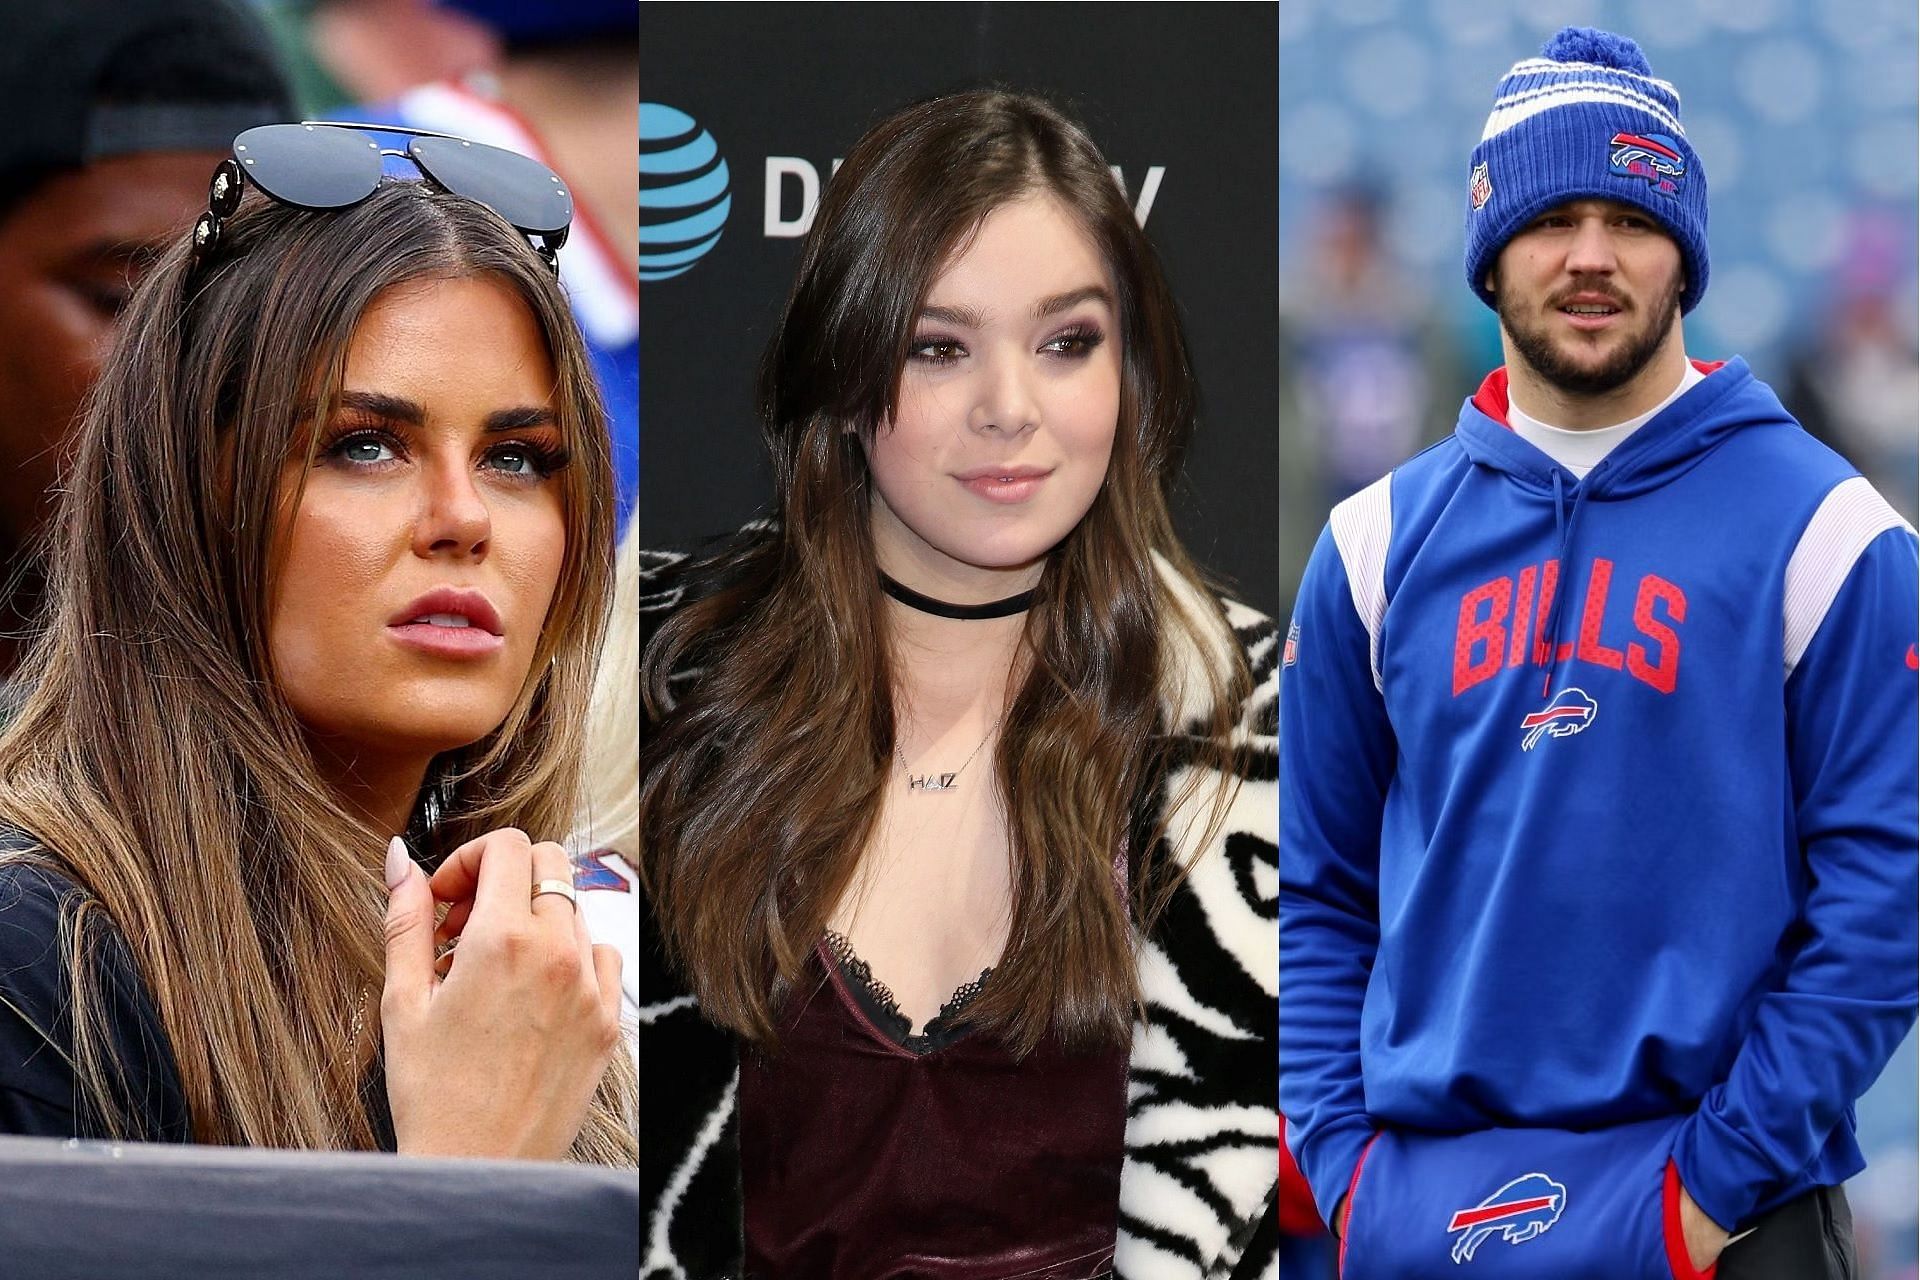 osh Allen and actress Hailee Steinfeld spotted together after rumors of Bills QB&rsquo;s ugly breakup with Brittany Williams